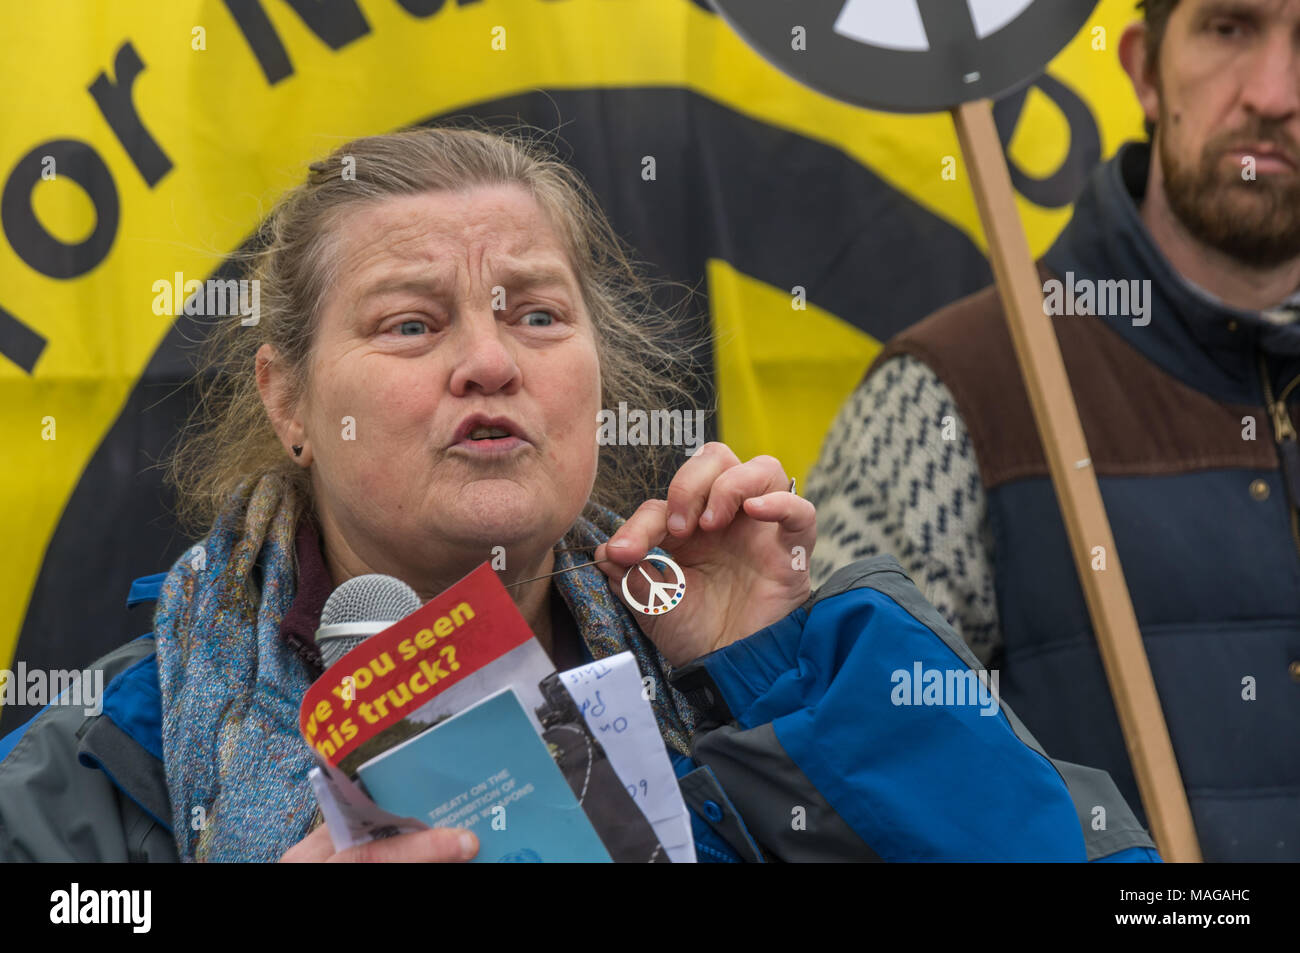 Aldermaston, UK. 1st Apr, 2018. Dr Rebecca Johnson, co-Chair of ICAN, long-time feminist peace campaigner and 2017 Nobel Laureate, holds a CND symbol and a copy of the UN treaty banning nuclear weapons. which was finalised last year and signed by 122 nations as she speaks at the CND celebration of the 60th anniversary of the first Aldermaston march which mobilised thousands against the Bomb and shaped radical protest for generations. Credit: Peter Marshall/Alamy Live News Stock Photo